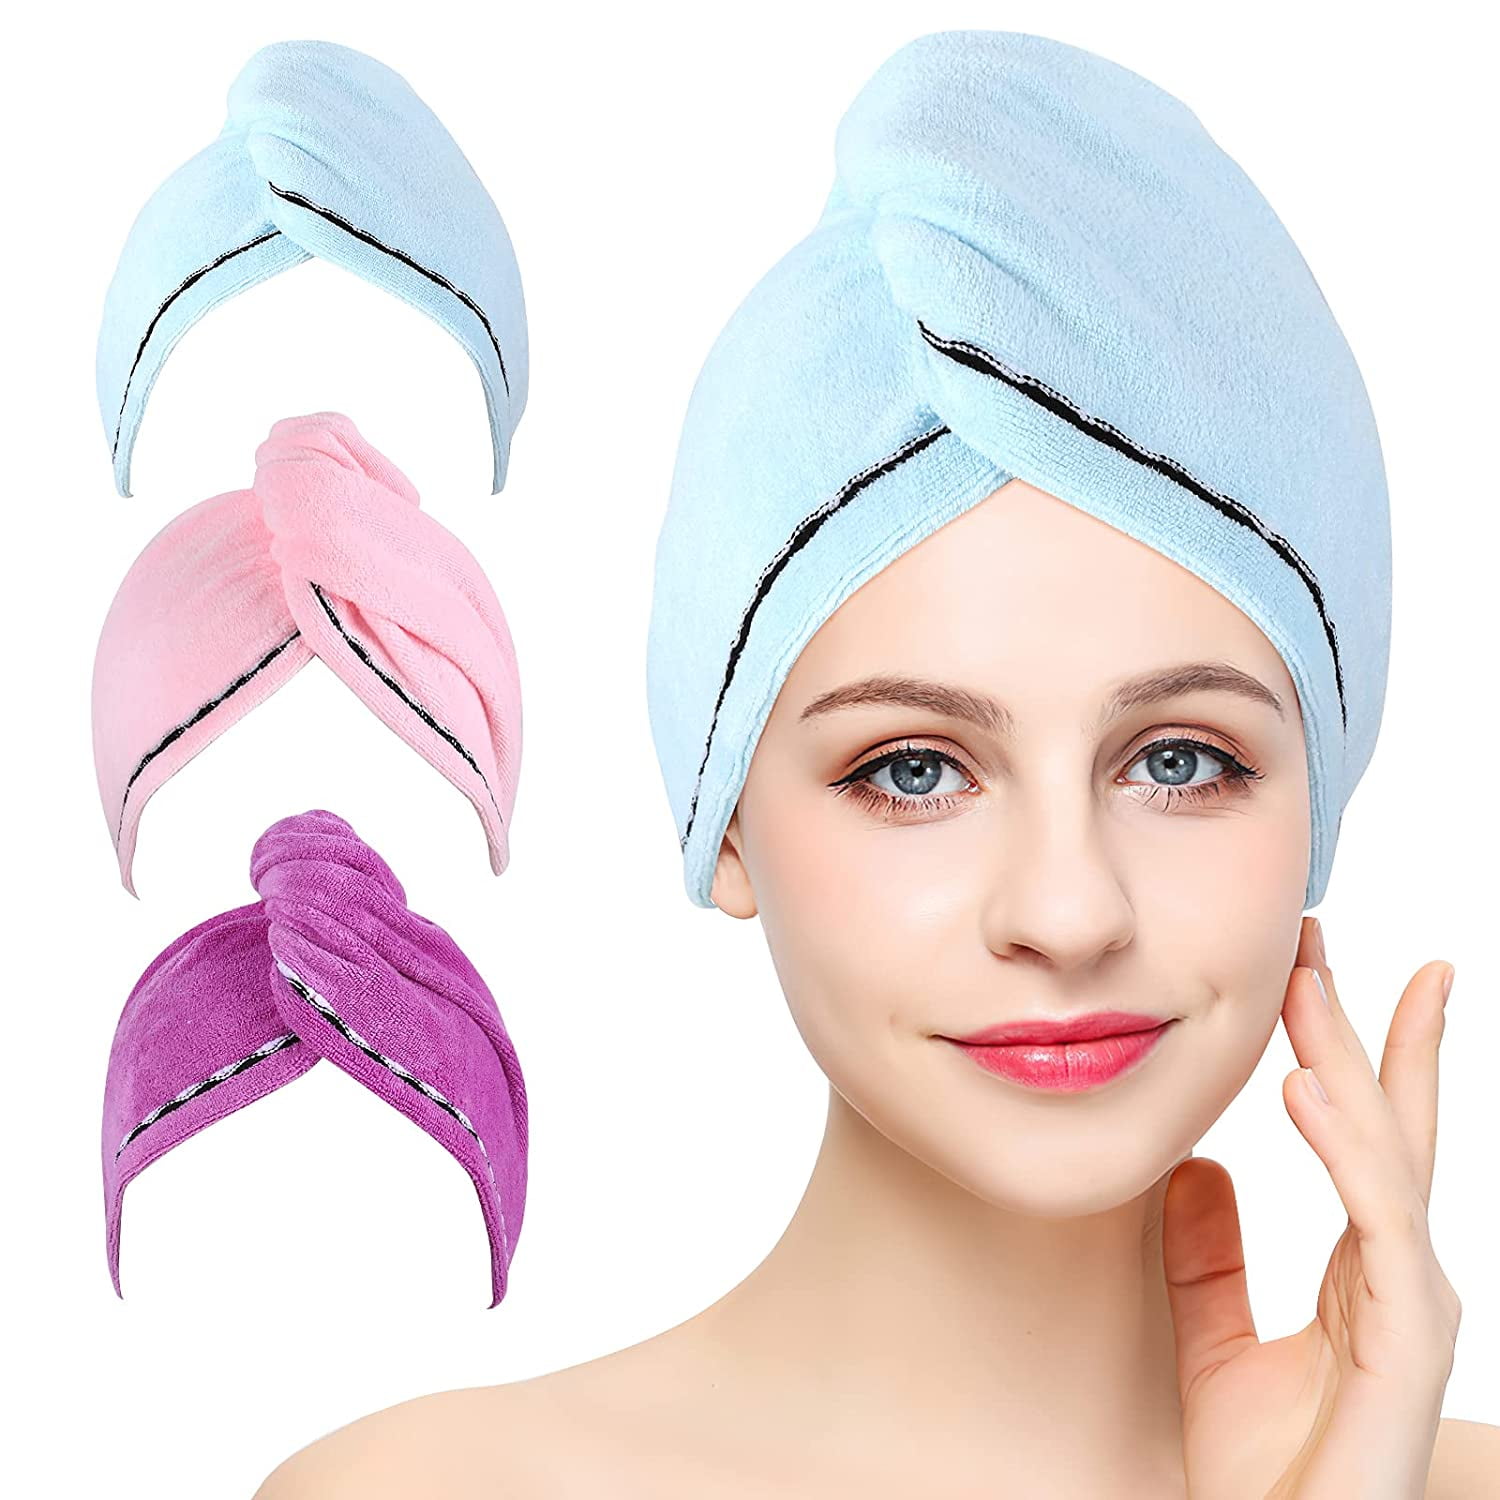 Microfiber Quick Dry Hair Drying Thick Magic Towel Cat Ear Wrap Hat Lady Shower 